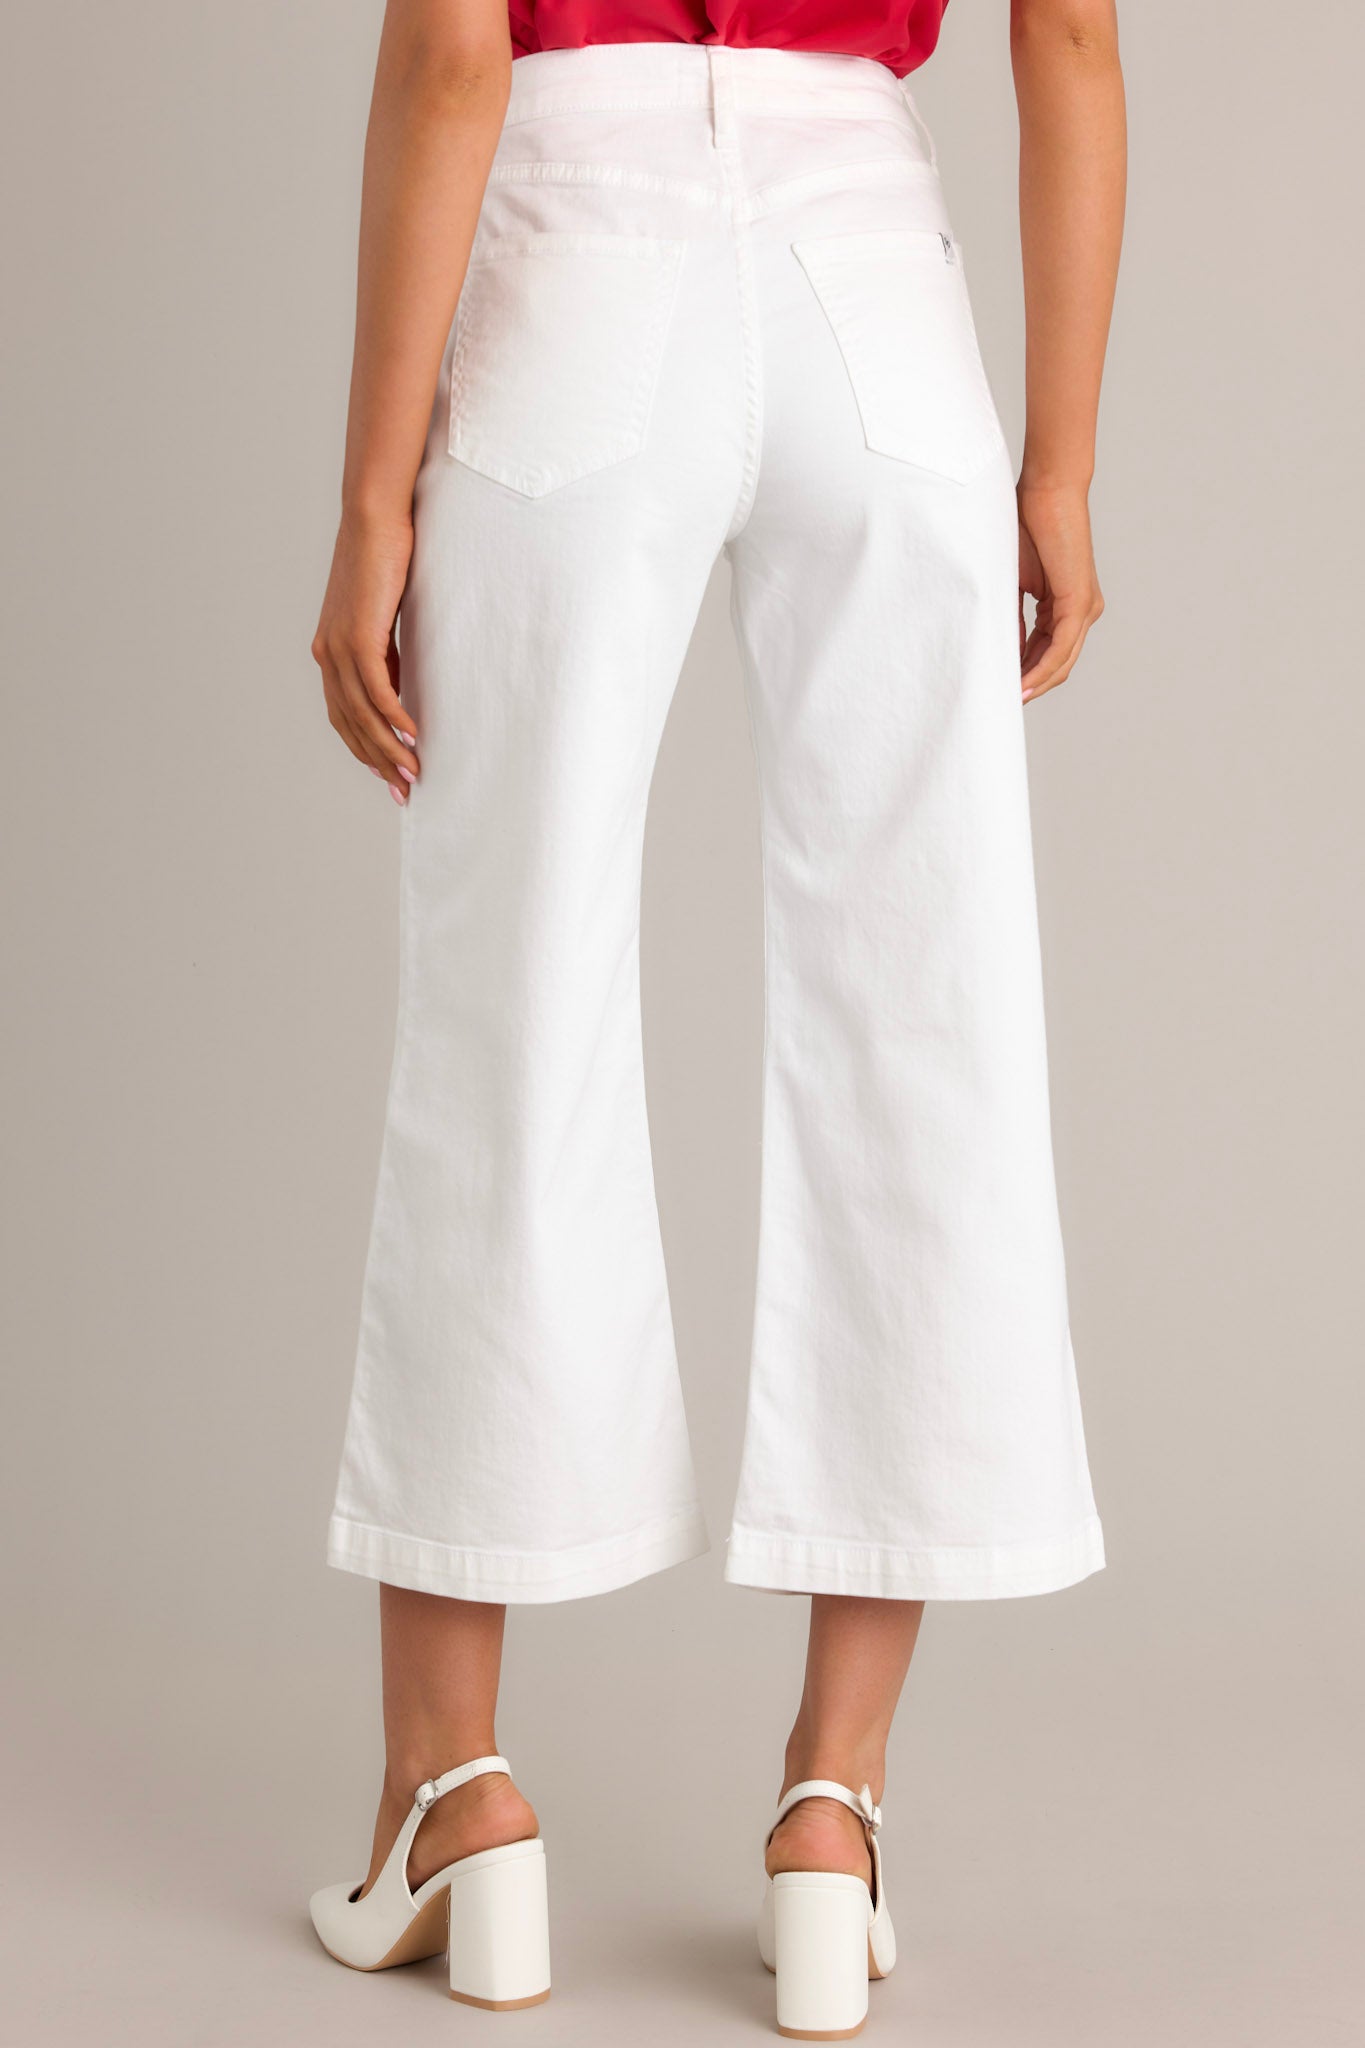 Close-up of the white jeans showing the button & zipper closure, belt loops, and functional front pockets.